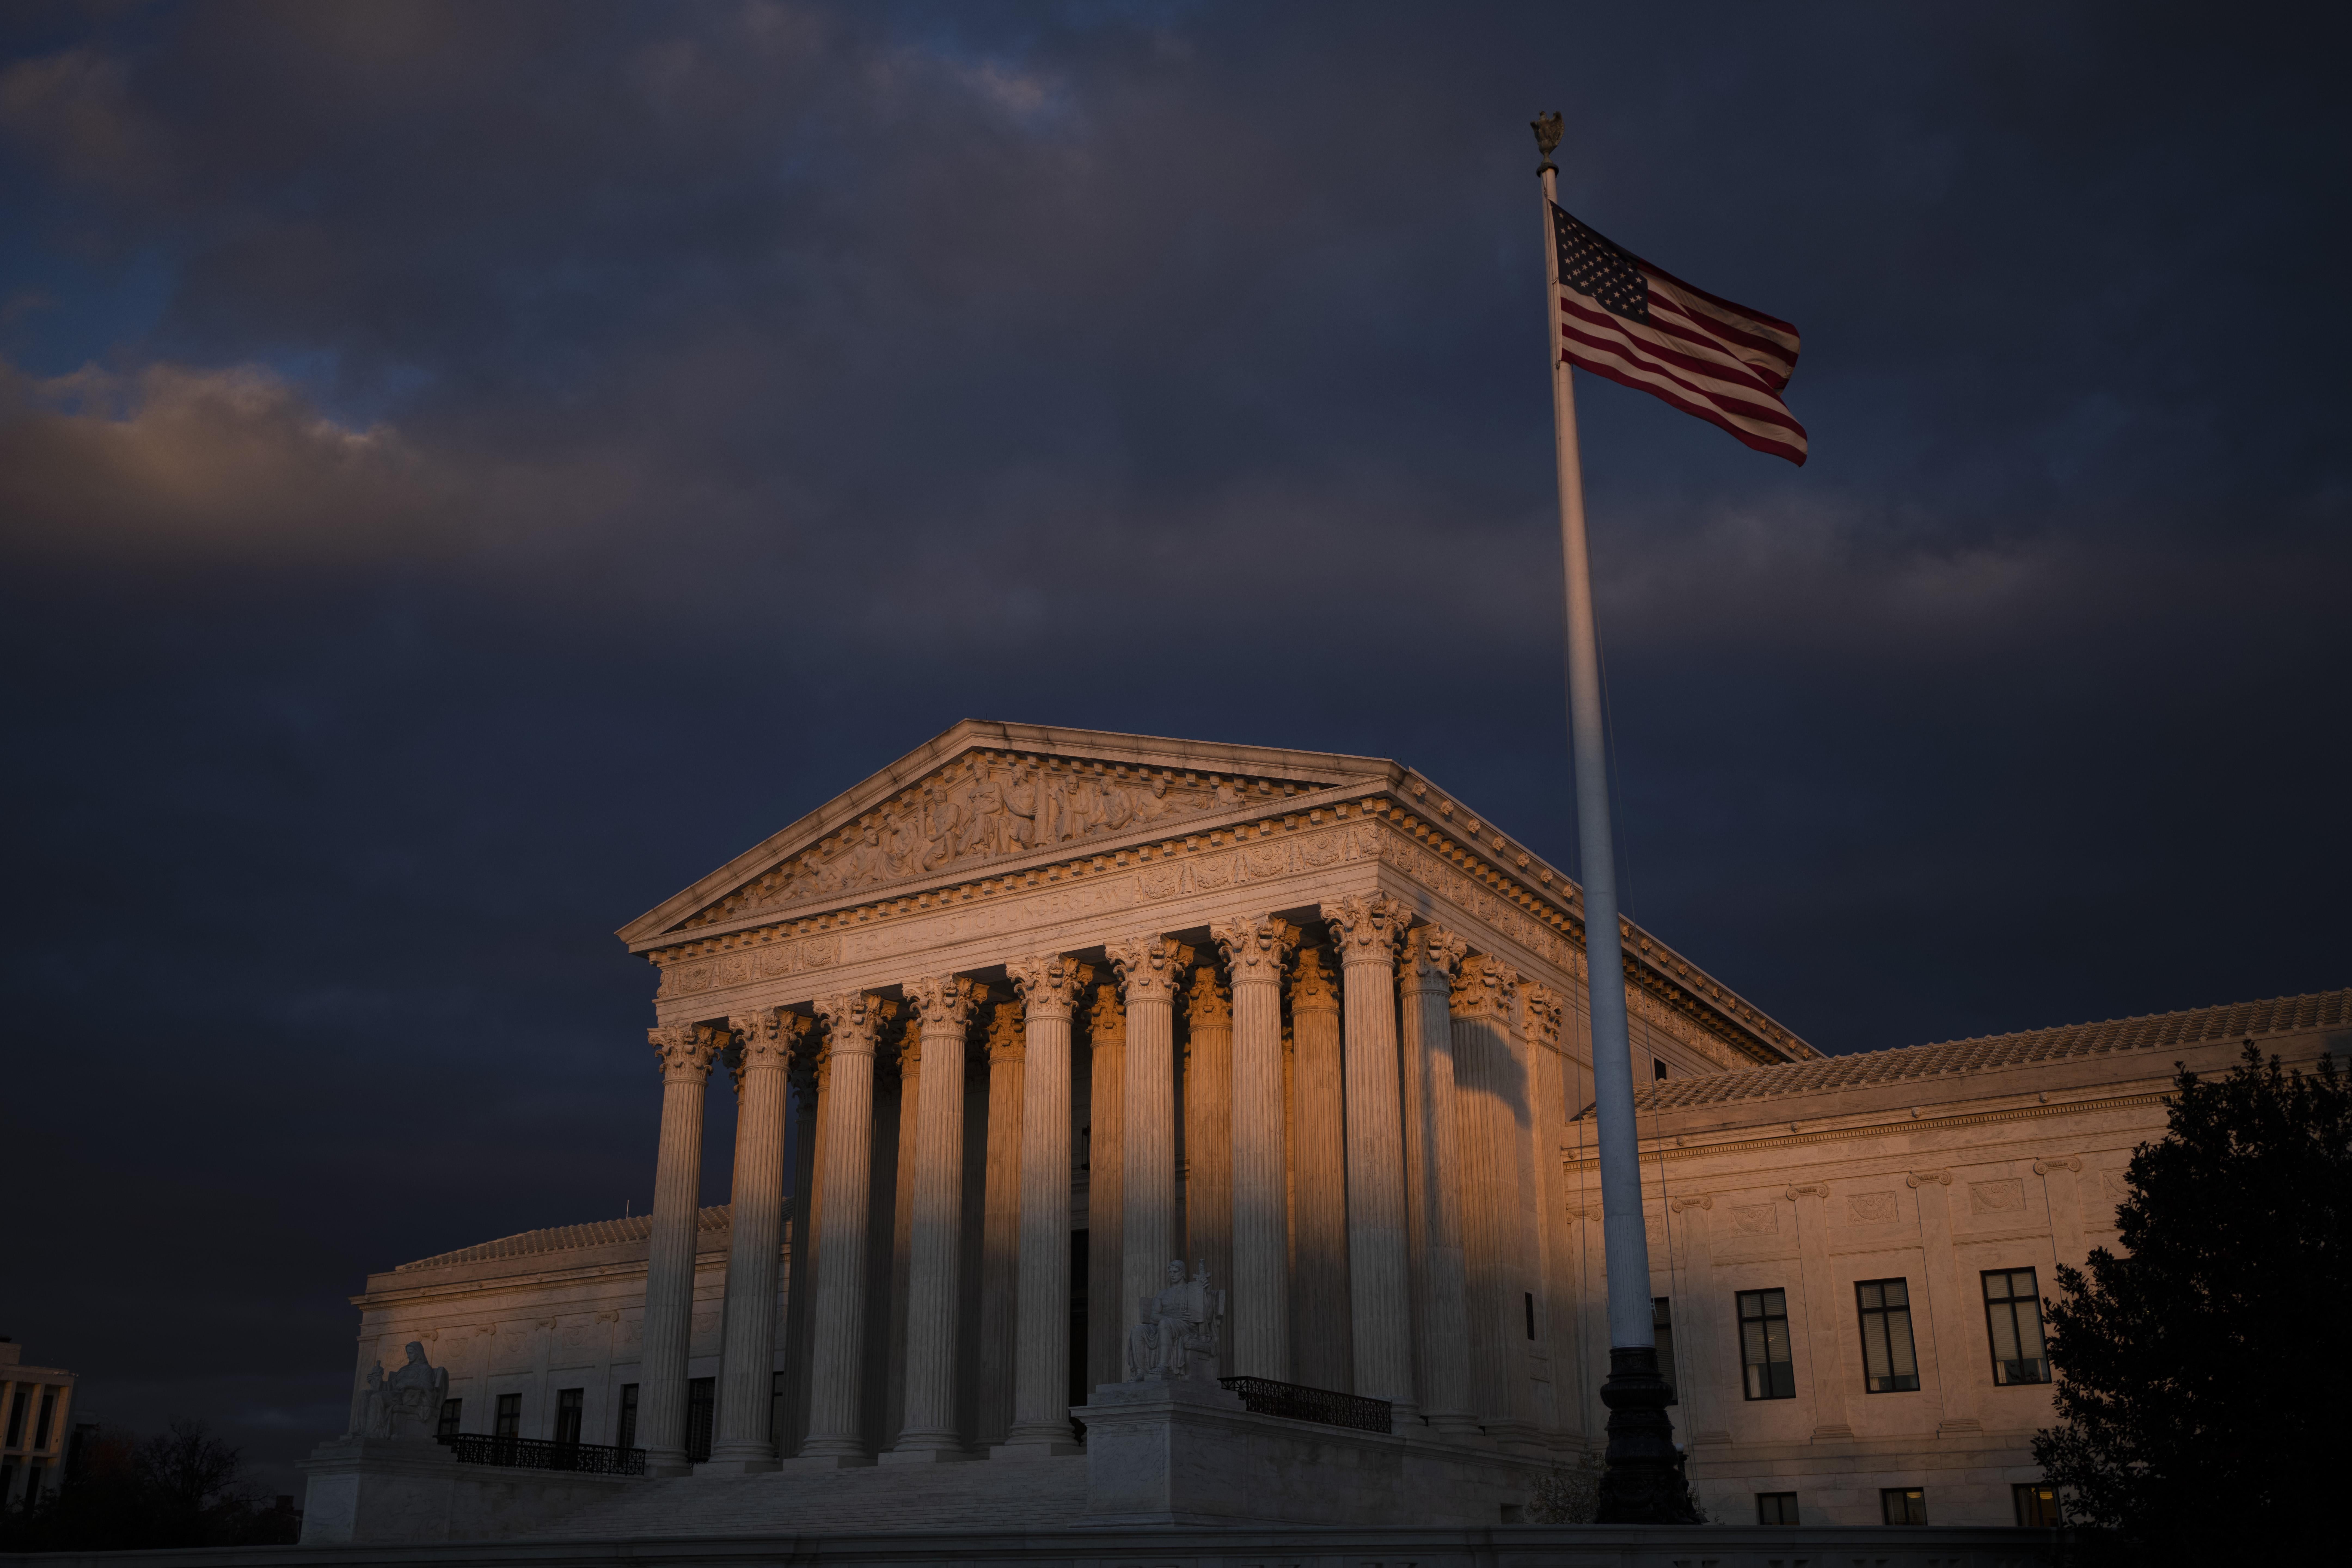 Night falls on the Supreme Court as an American flag flaps in the wind.